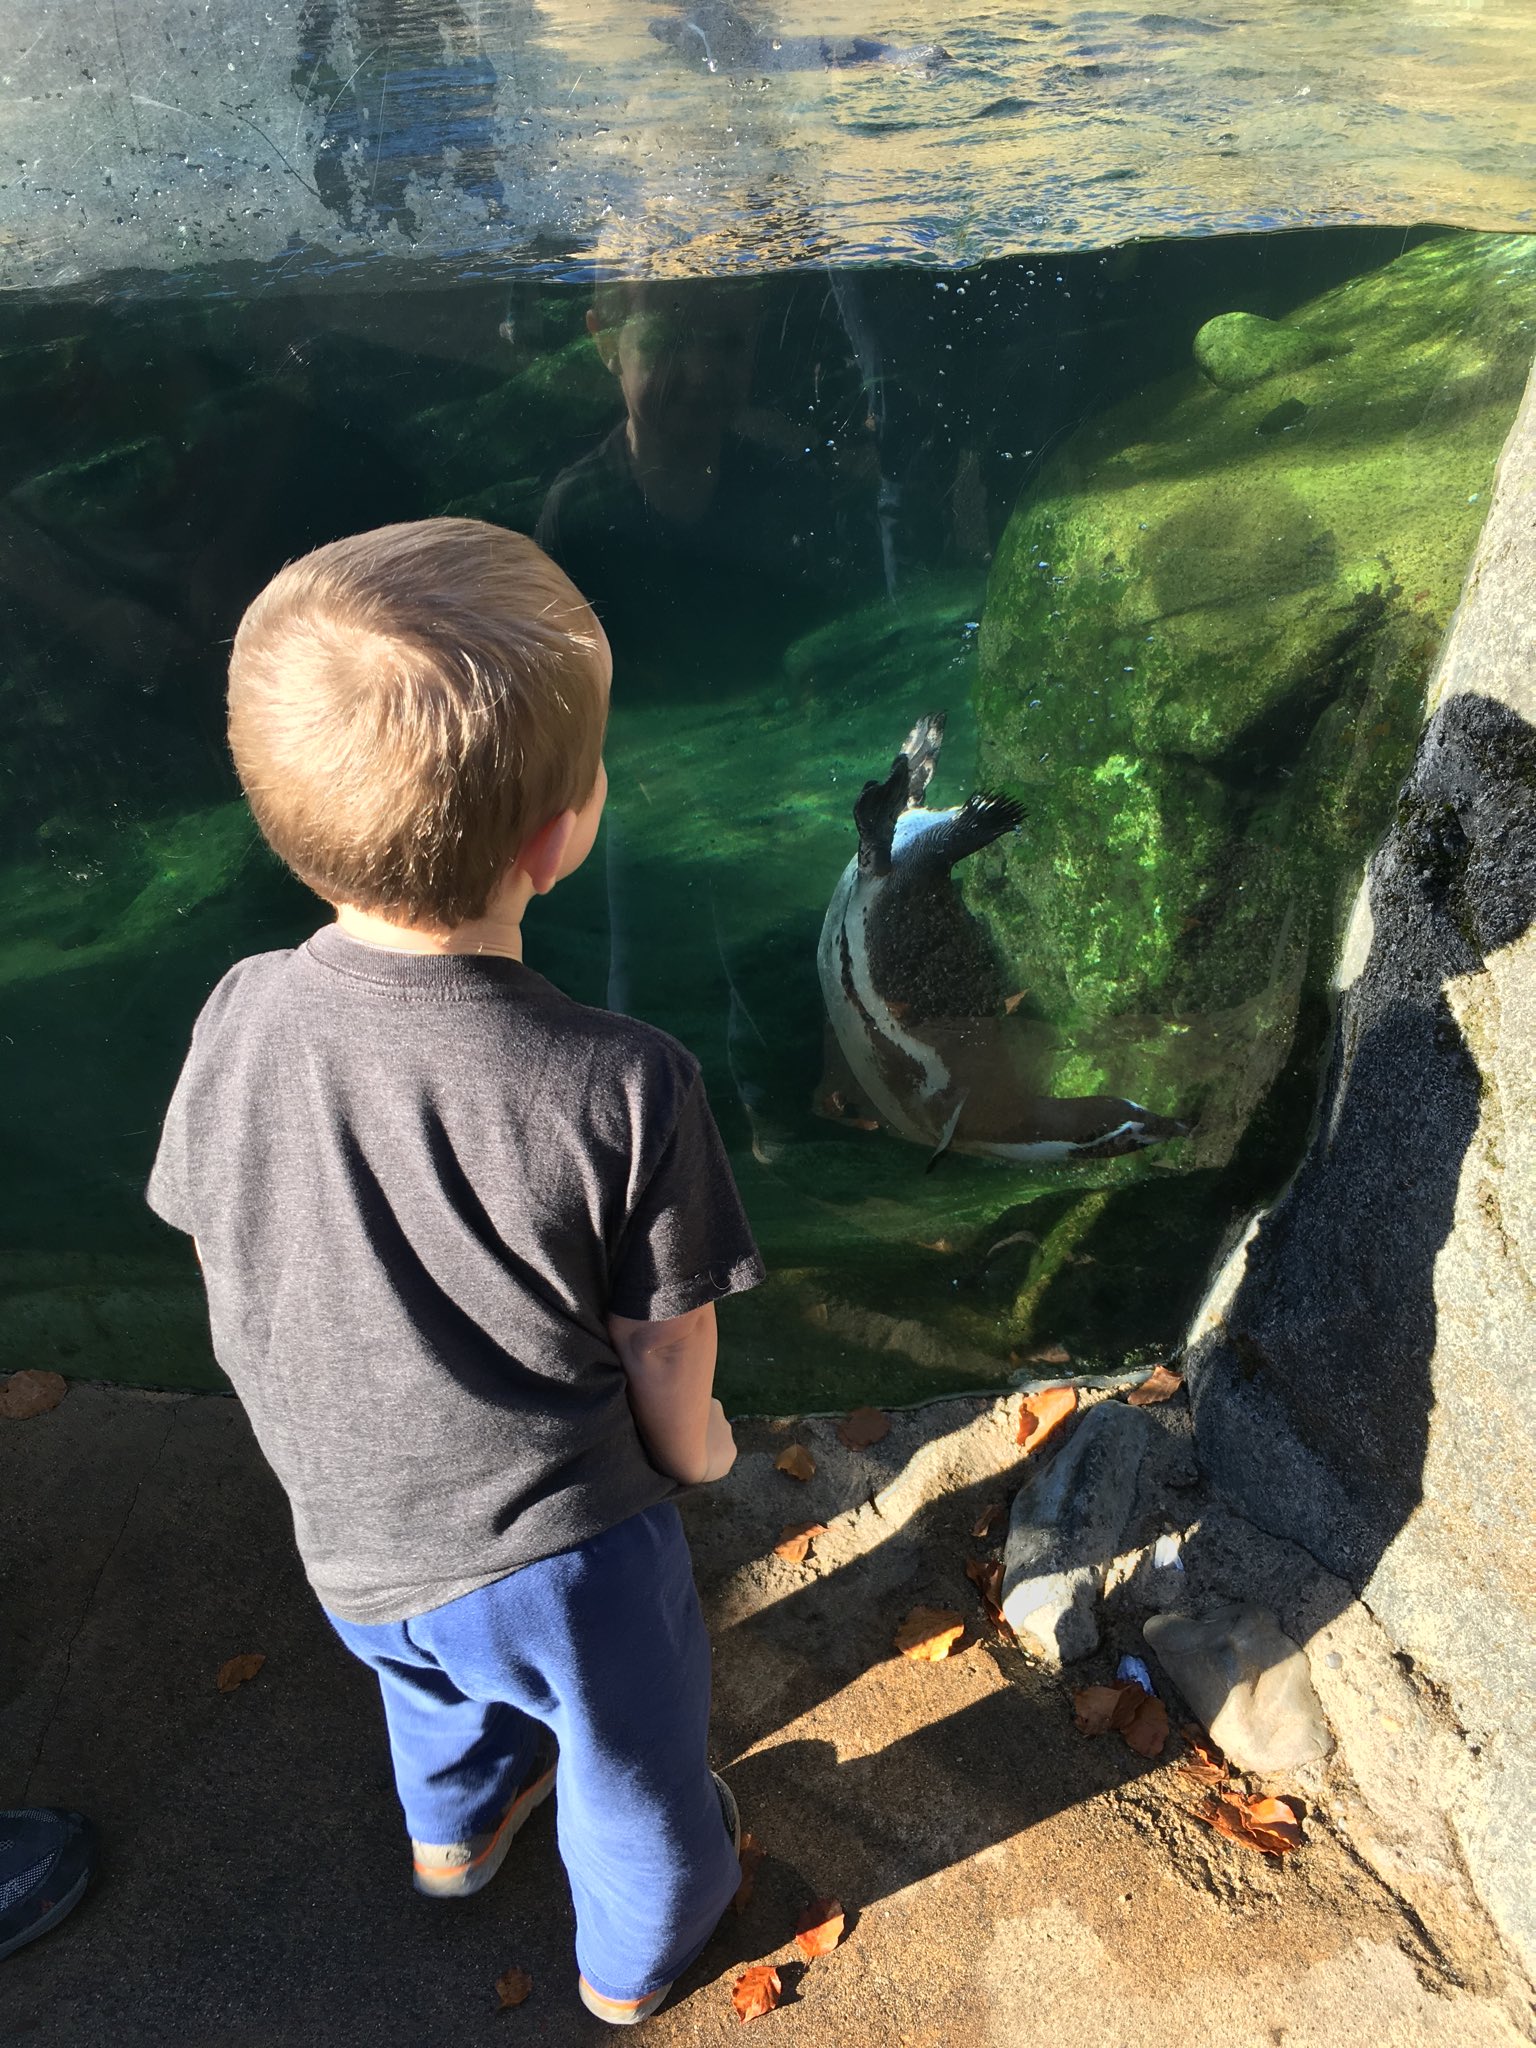 Julian, with his back to us, stands in front of a wall of glass with greenish water on the other side and a penguin frolicking.